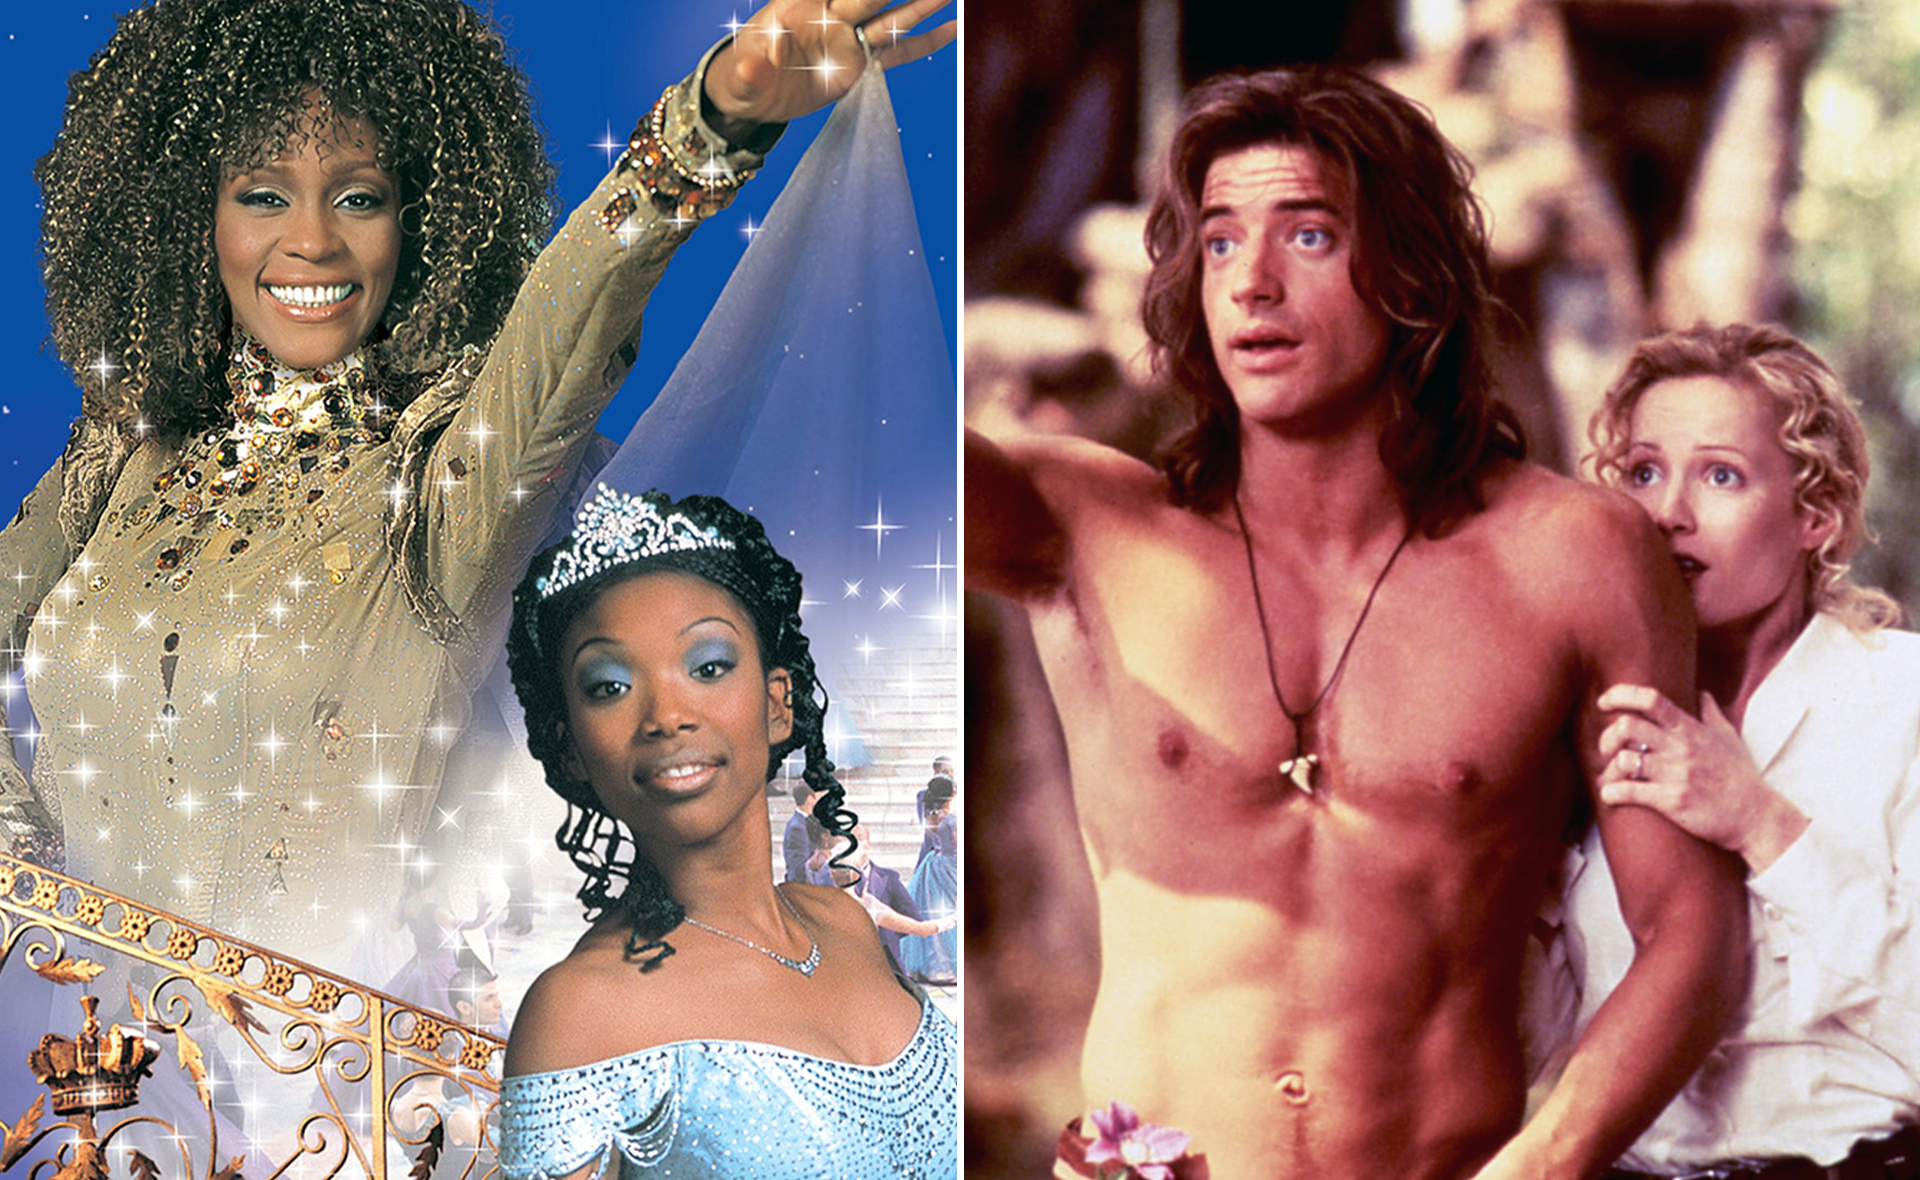 The five most nostalgic “forgotten” Disney movies grown ups and kids can both enjoy